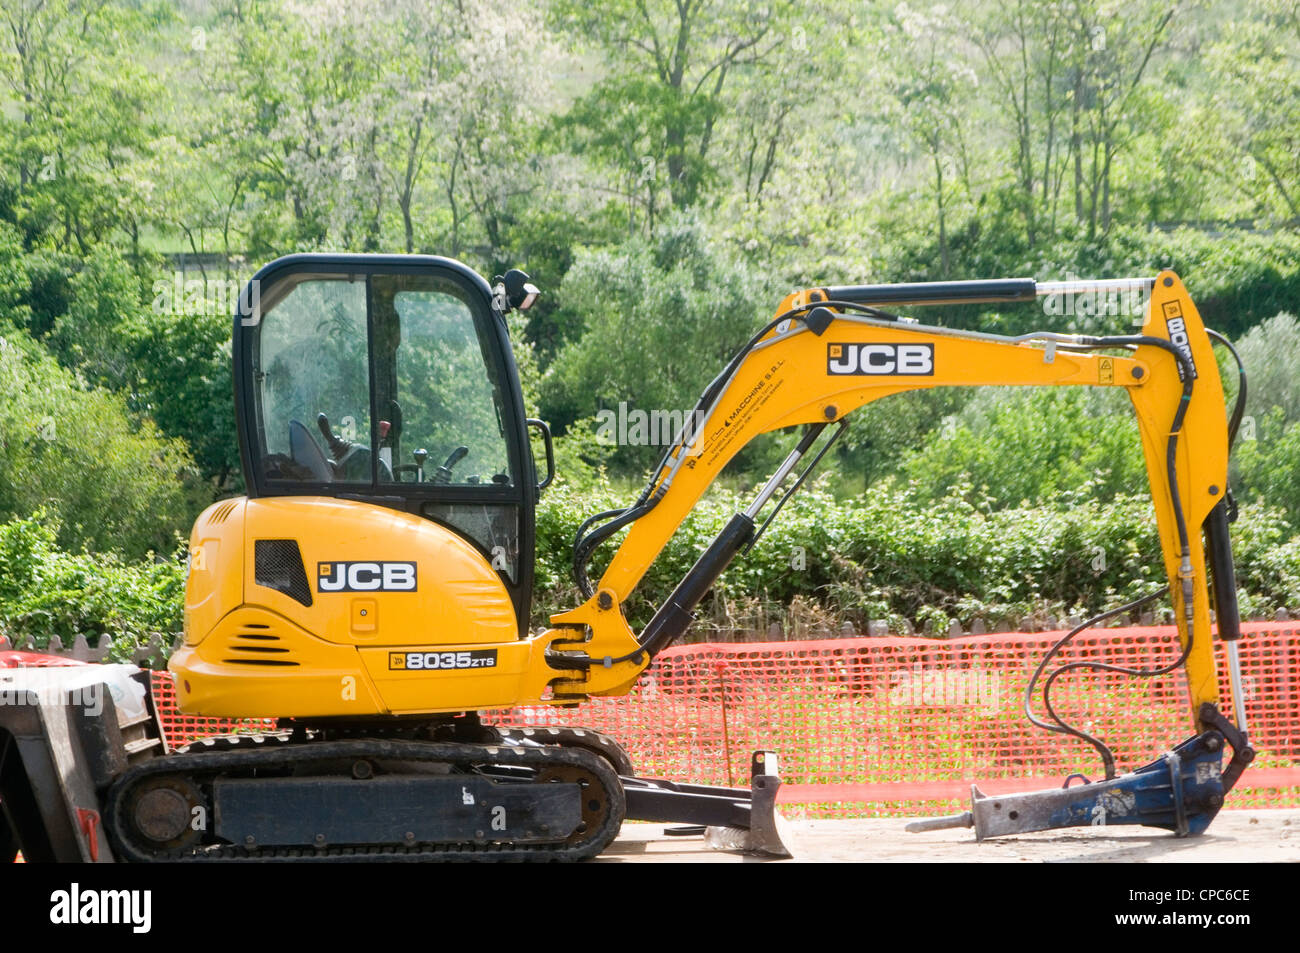 jcb mini digger diggers yellow plant hire earthmover earthmovers equipment fitted with a jackhammer british export exports expor Stock Photo